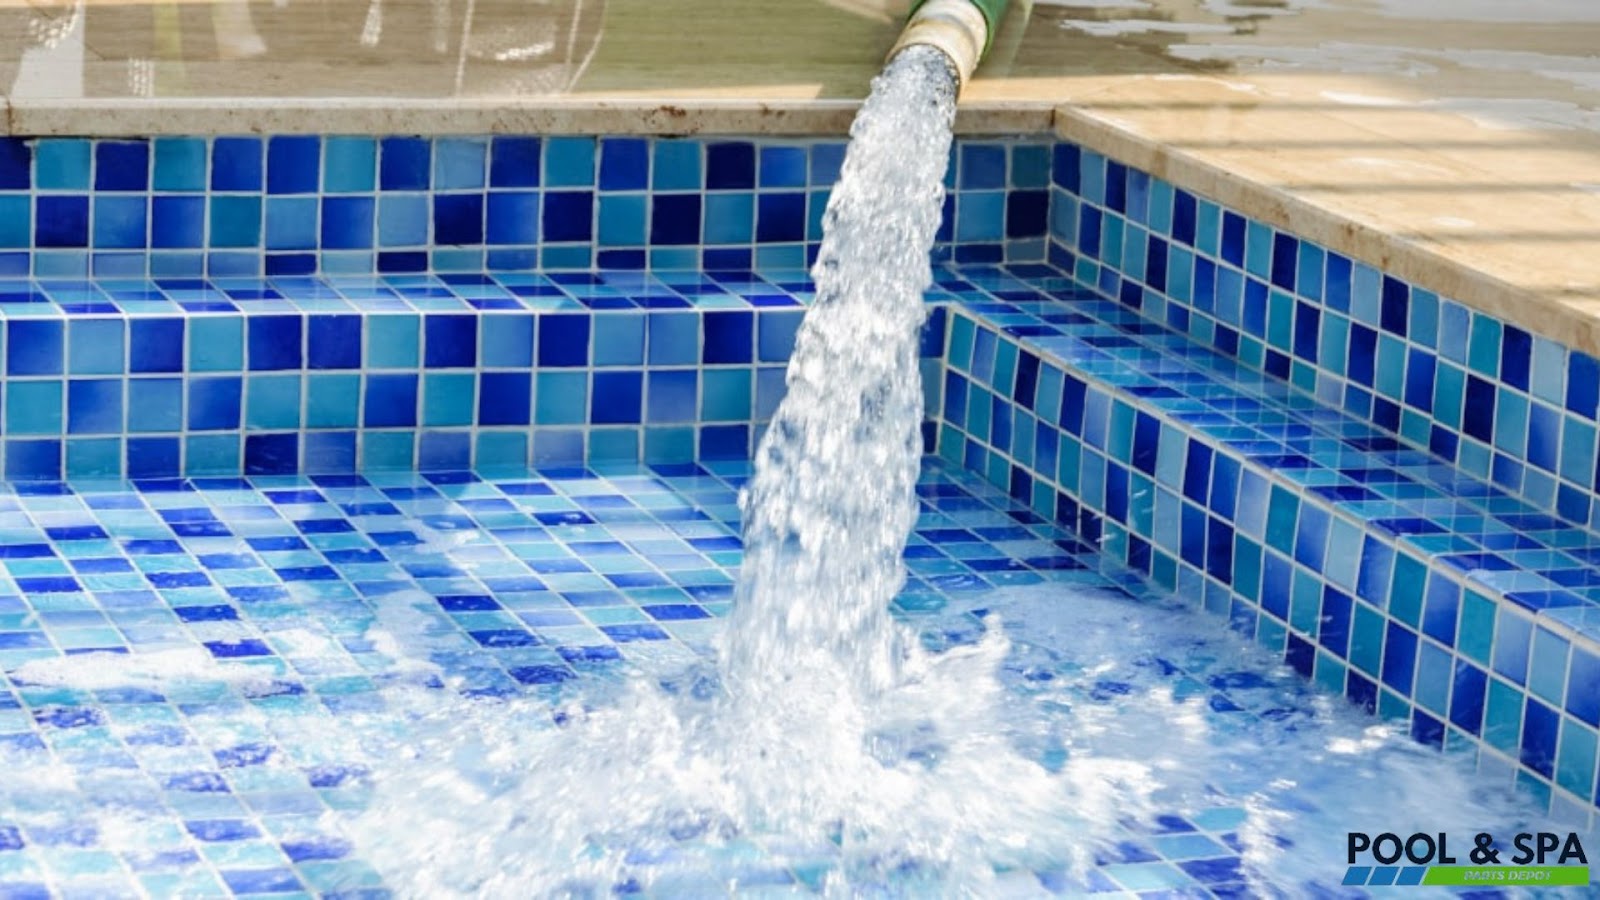 Refill and Rebalance Your Pool